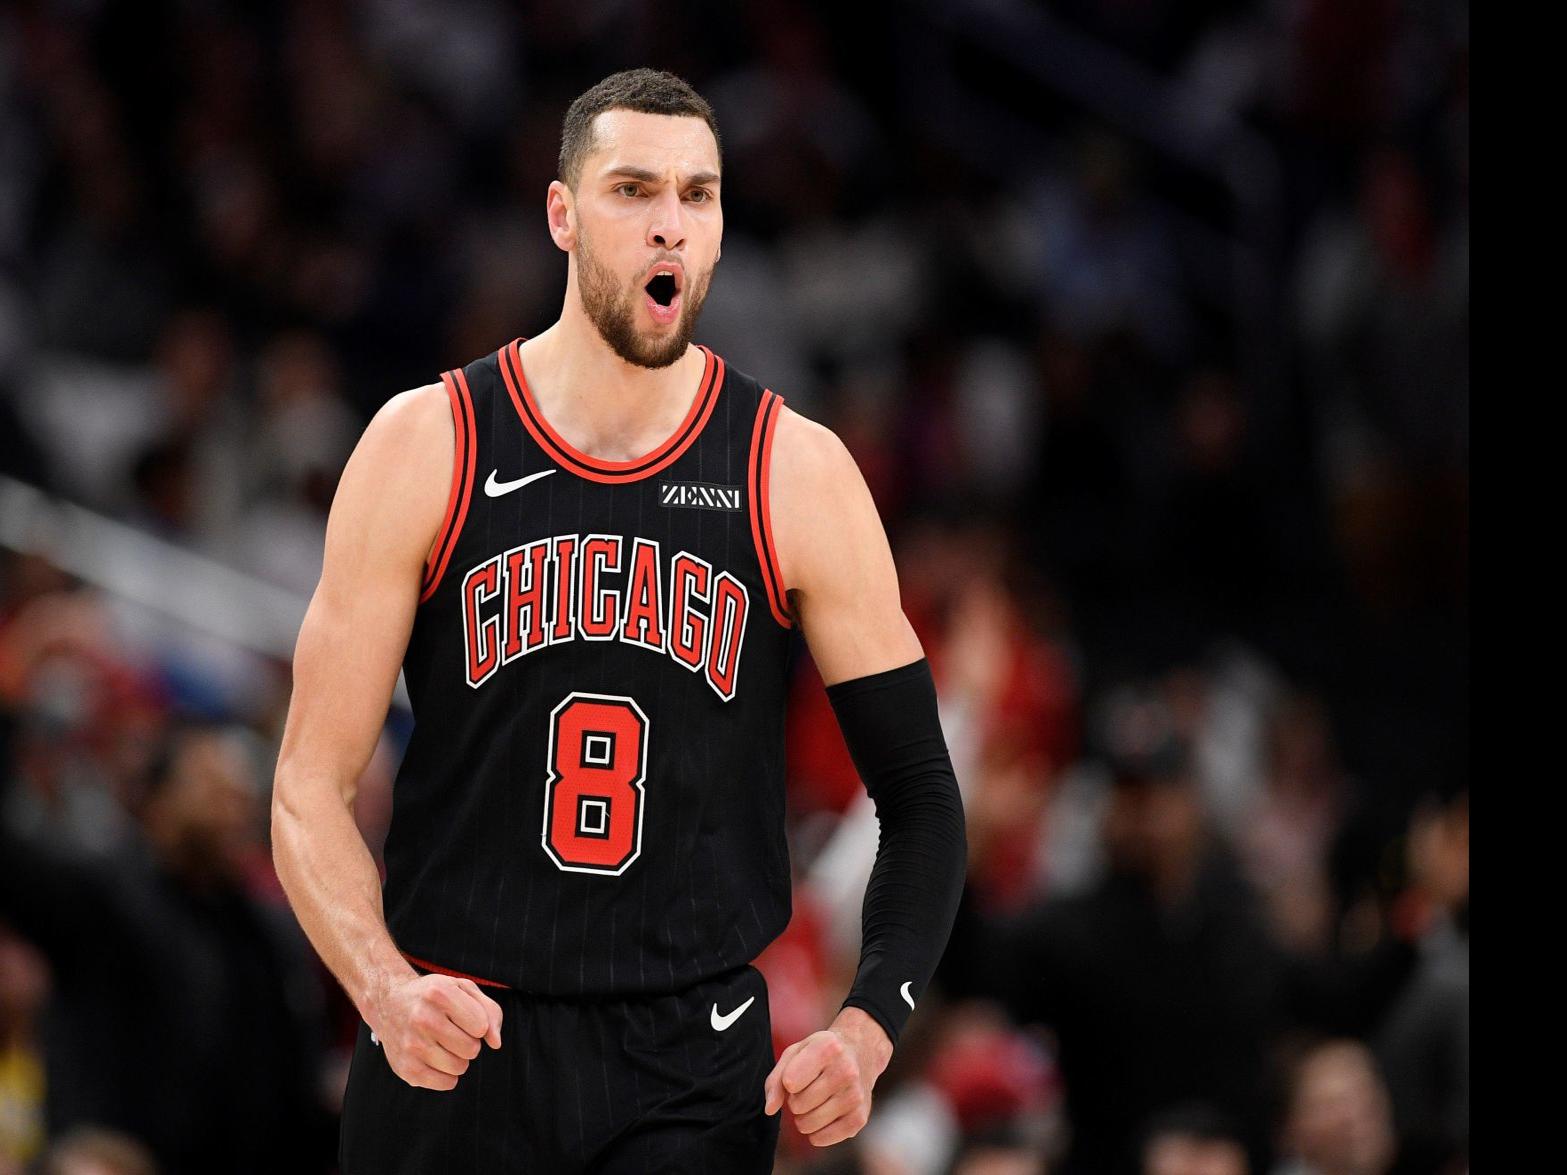 The Season Is Over For The Chicago Bulls Here S An Evaluation Of Their Roster And Where It Stands For 2020 21 Basketball Pantagraph Com